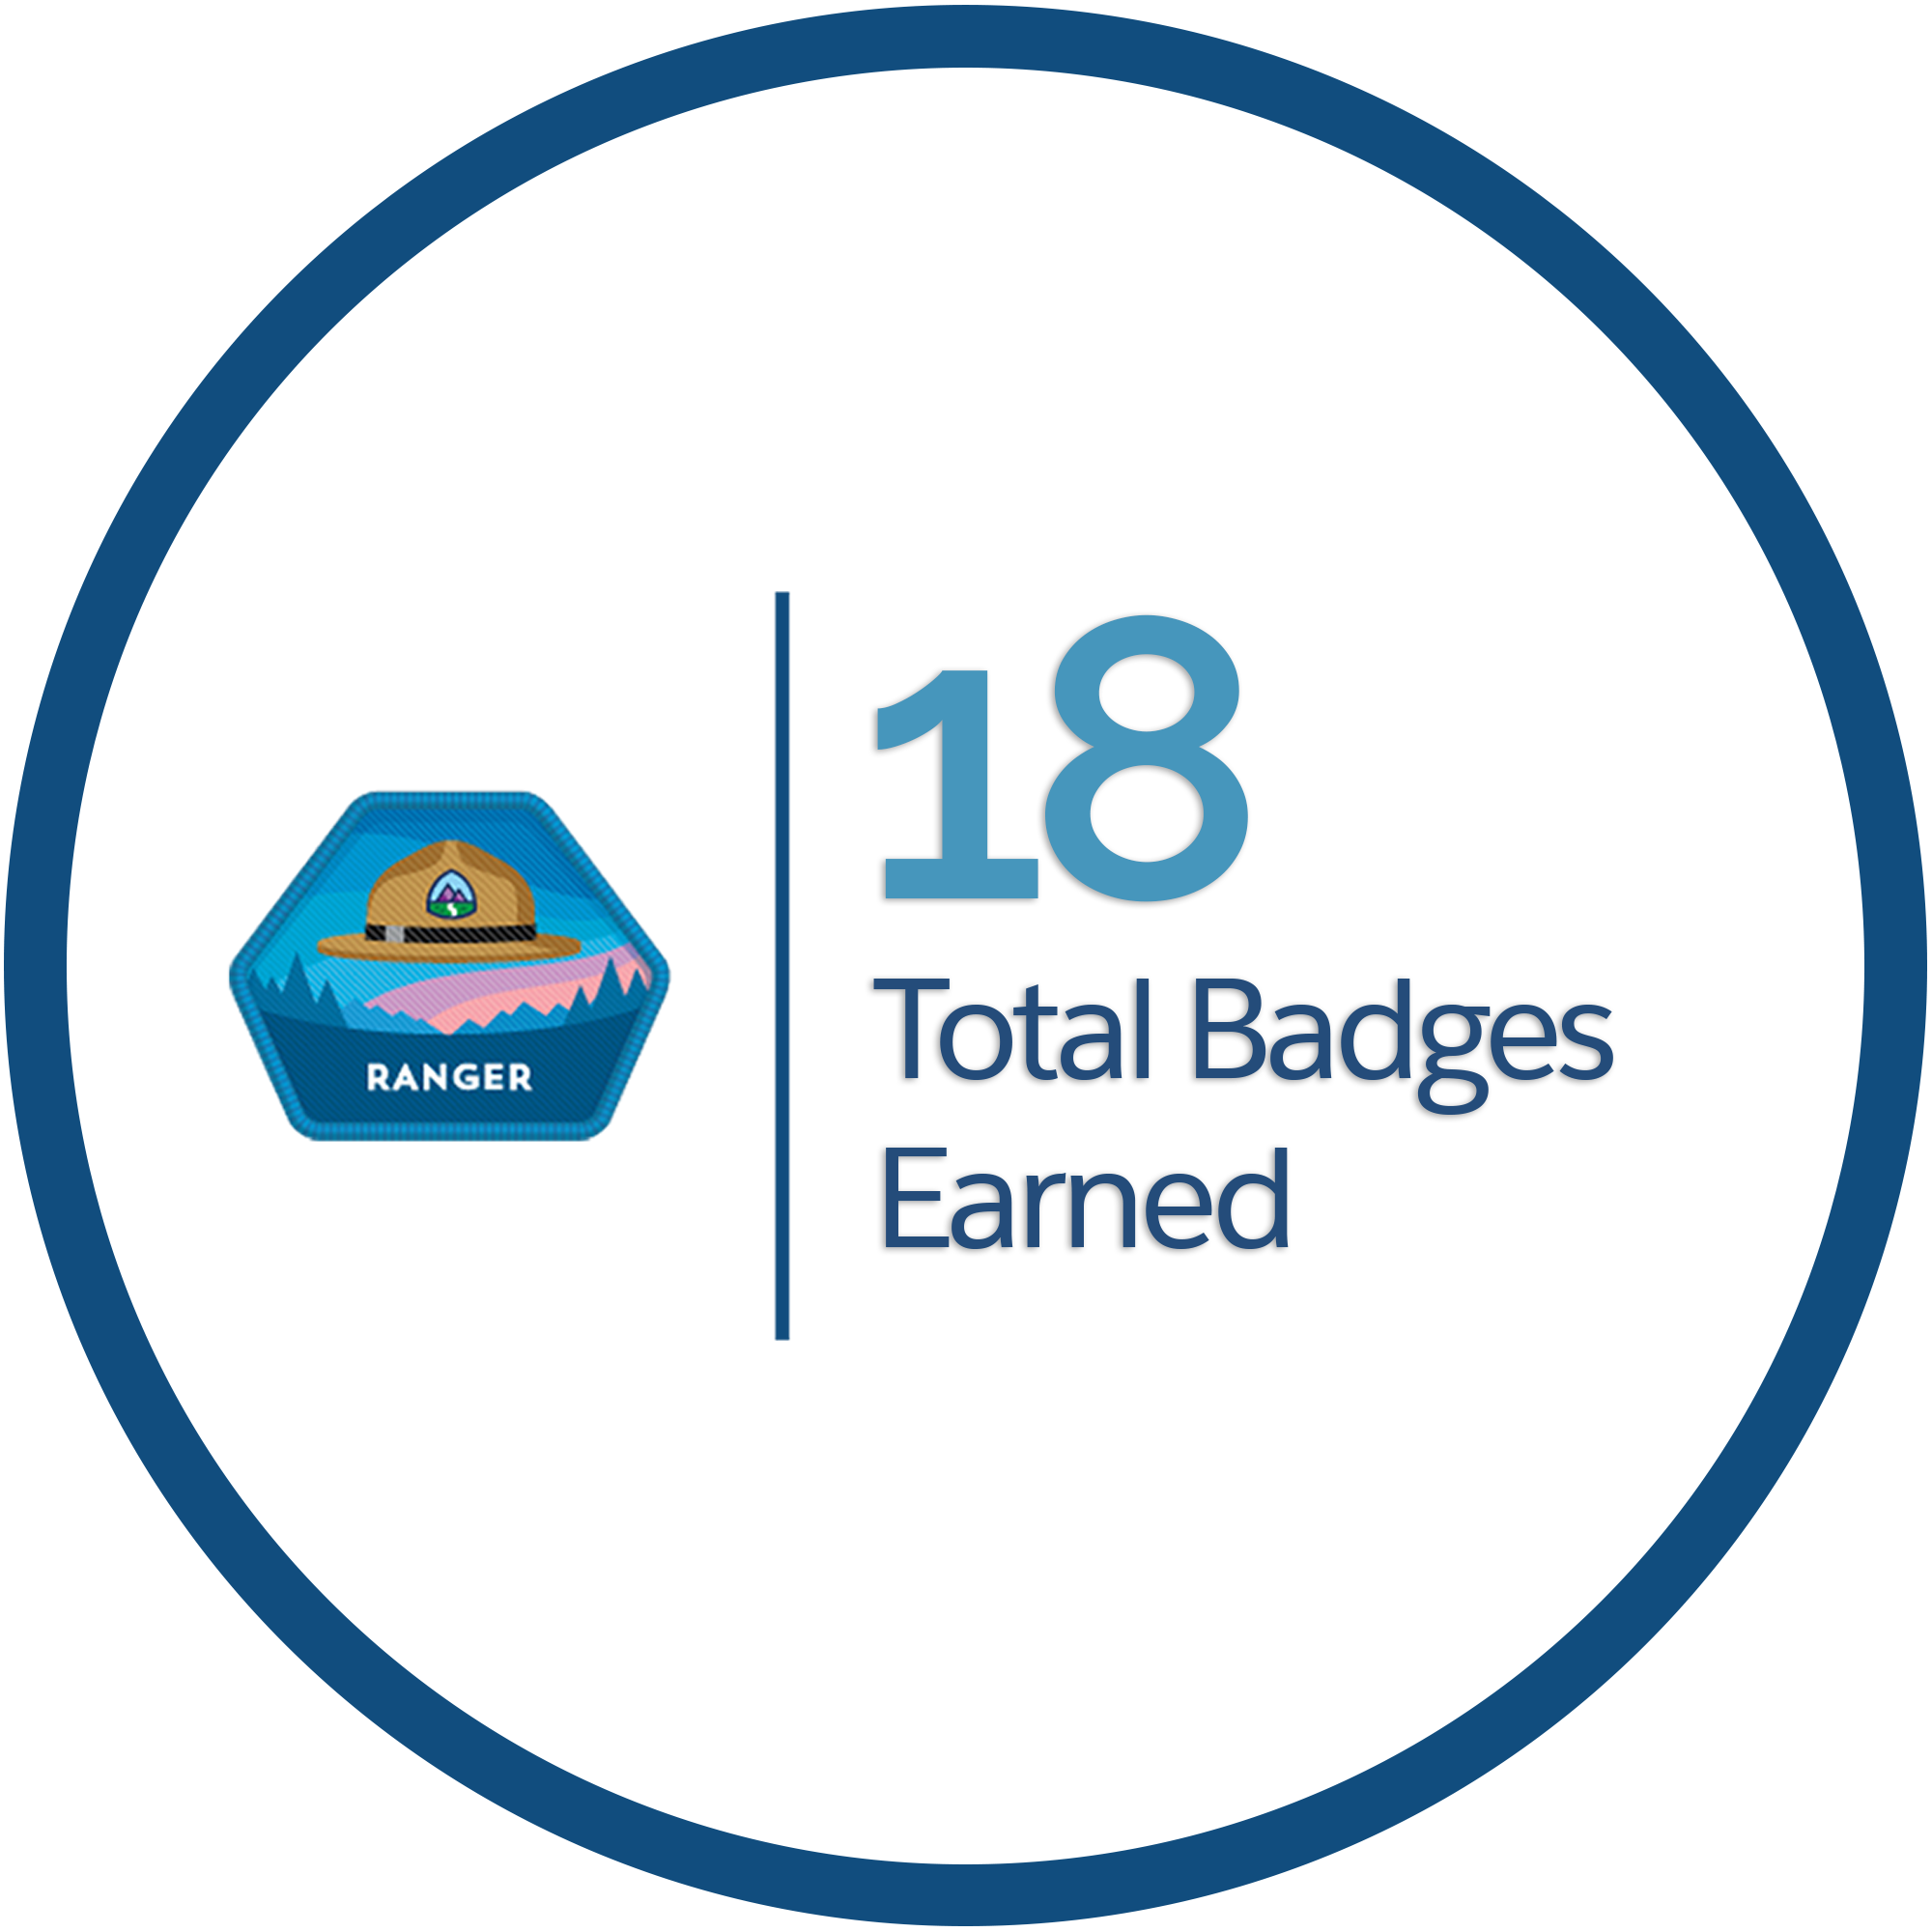 Graphic that shows 18 trailhead badges earned